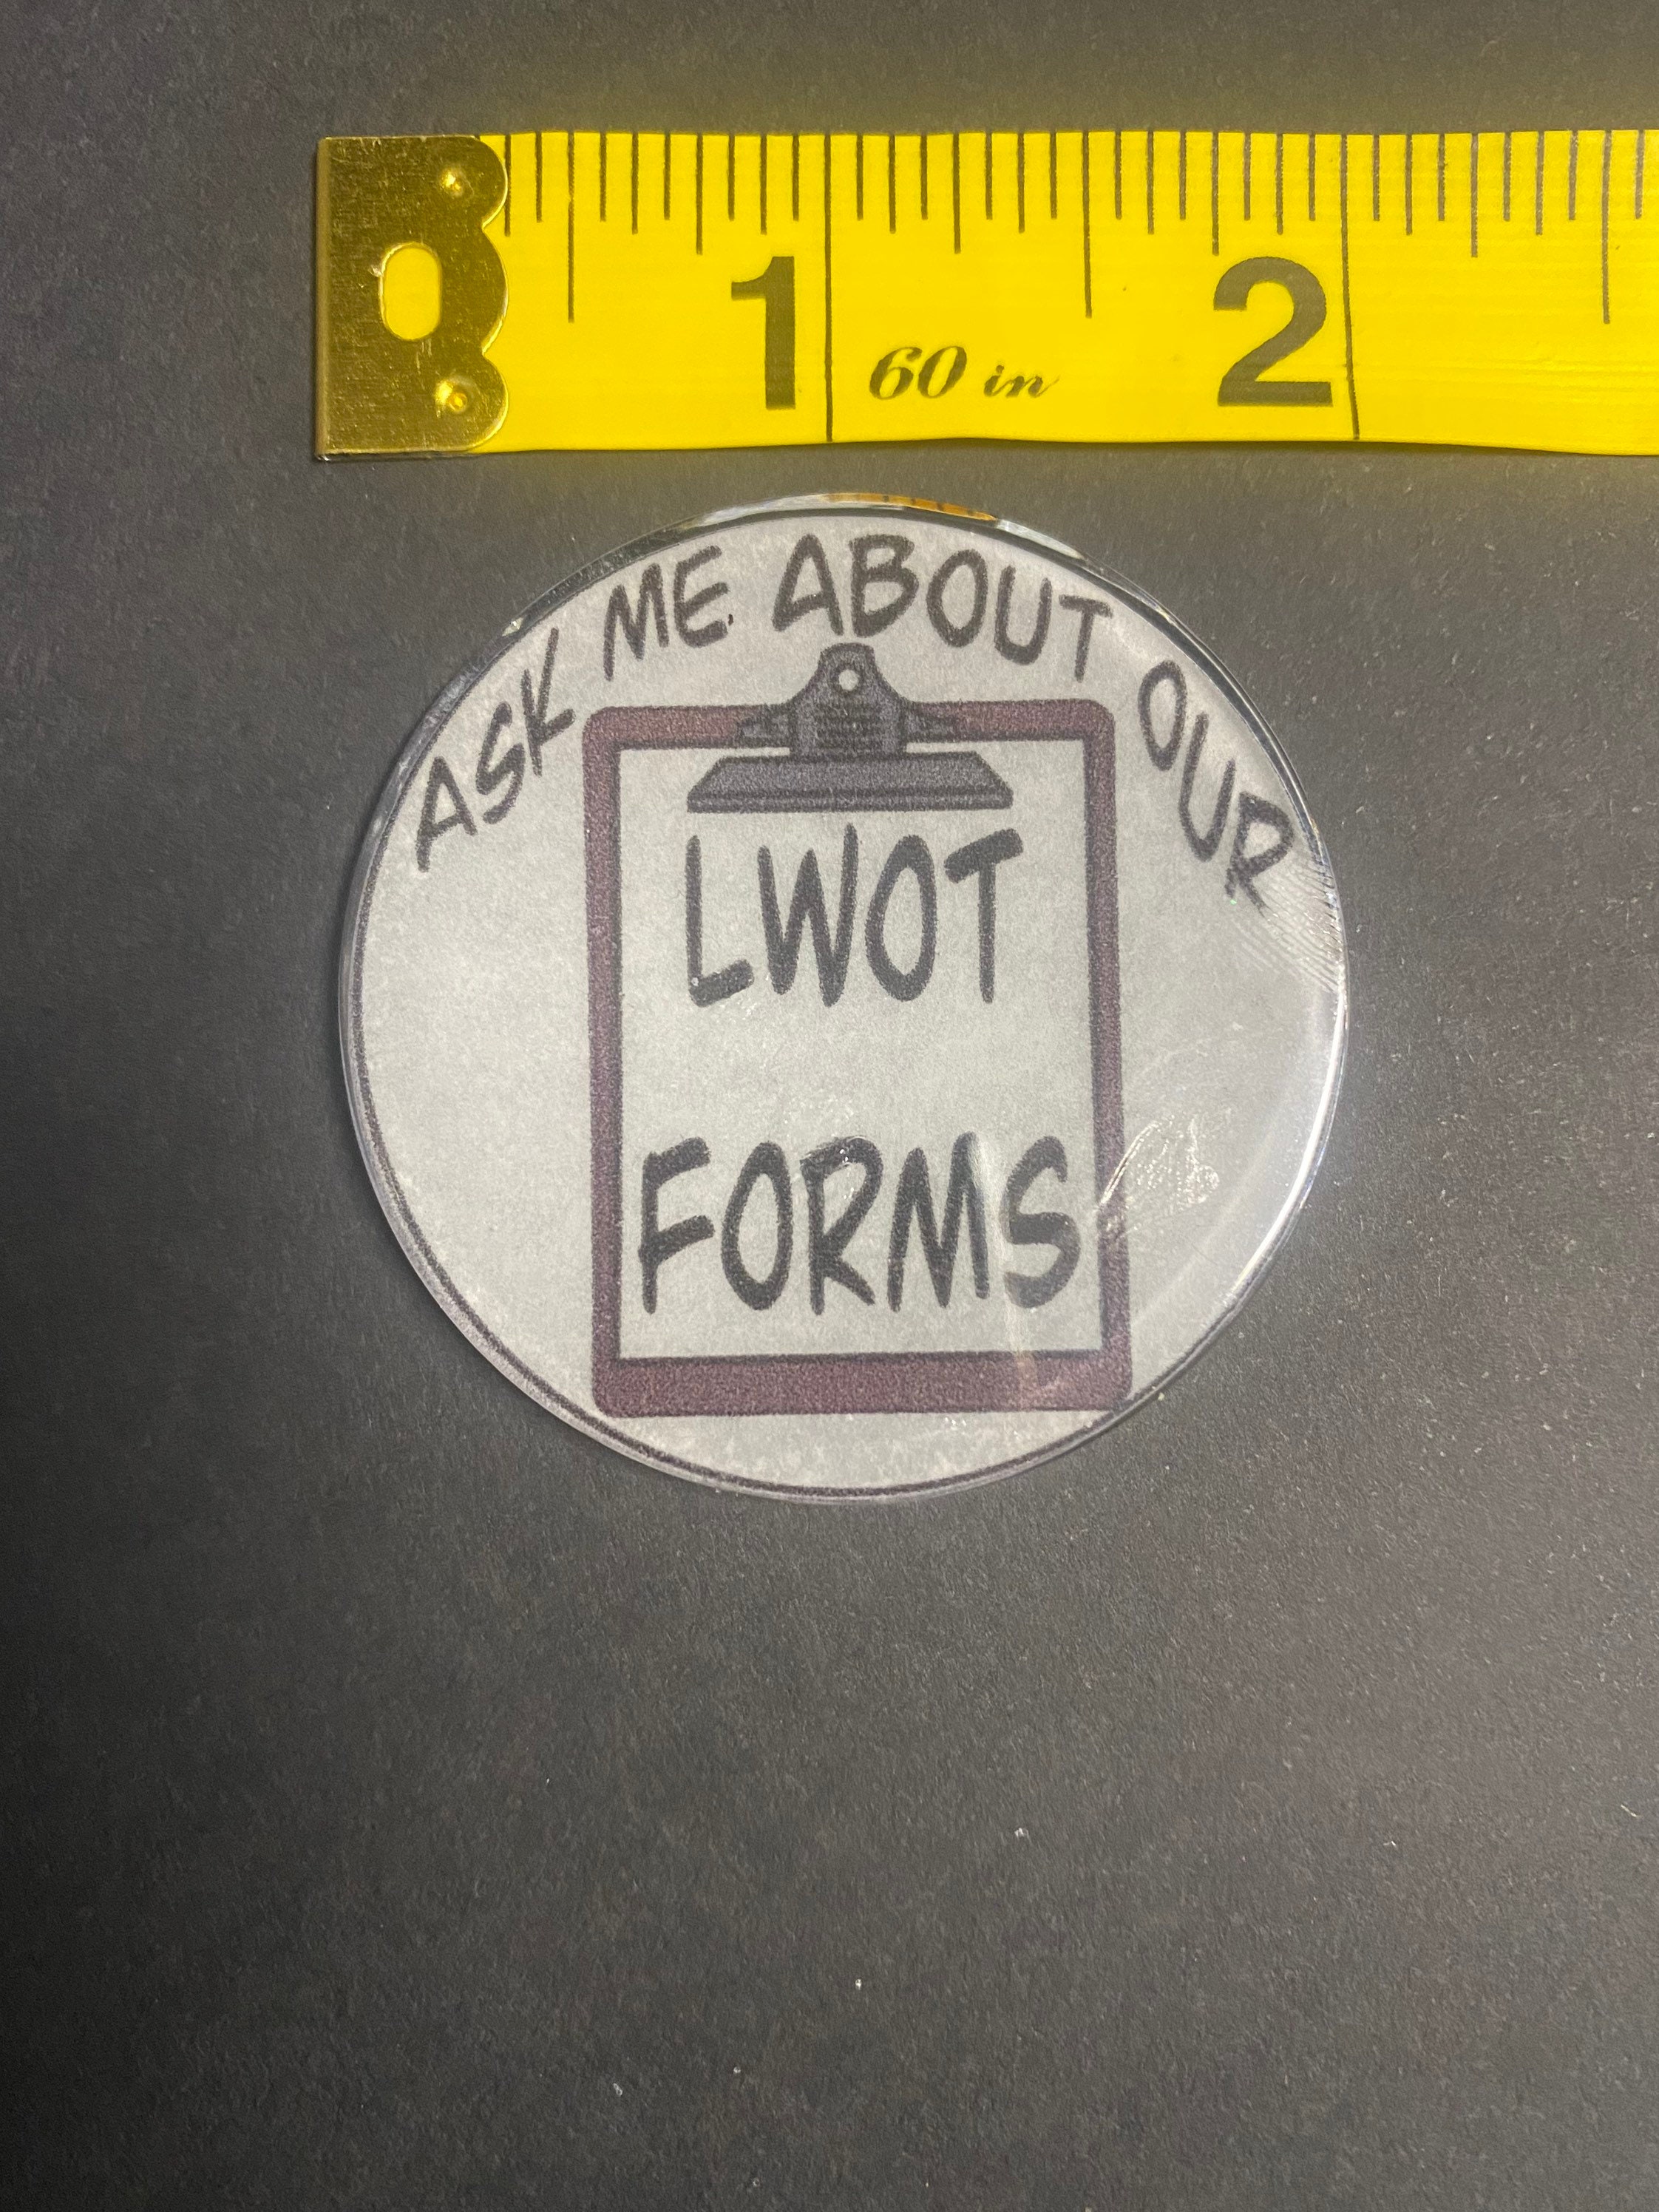 Ask Me About Our LWOT Forms. Funny Healthcare Badge Reel. Cute Healthcare or Other Badge Reel. High Quality 100% Badge.